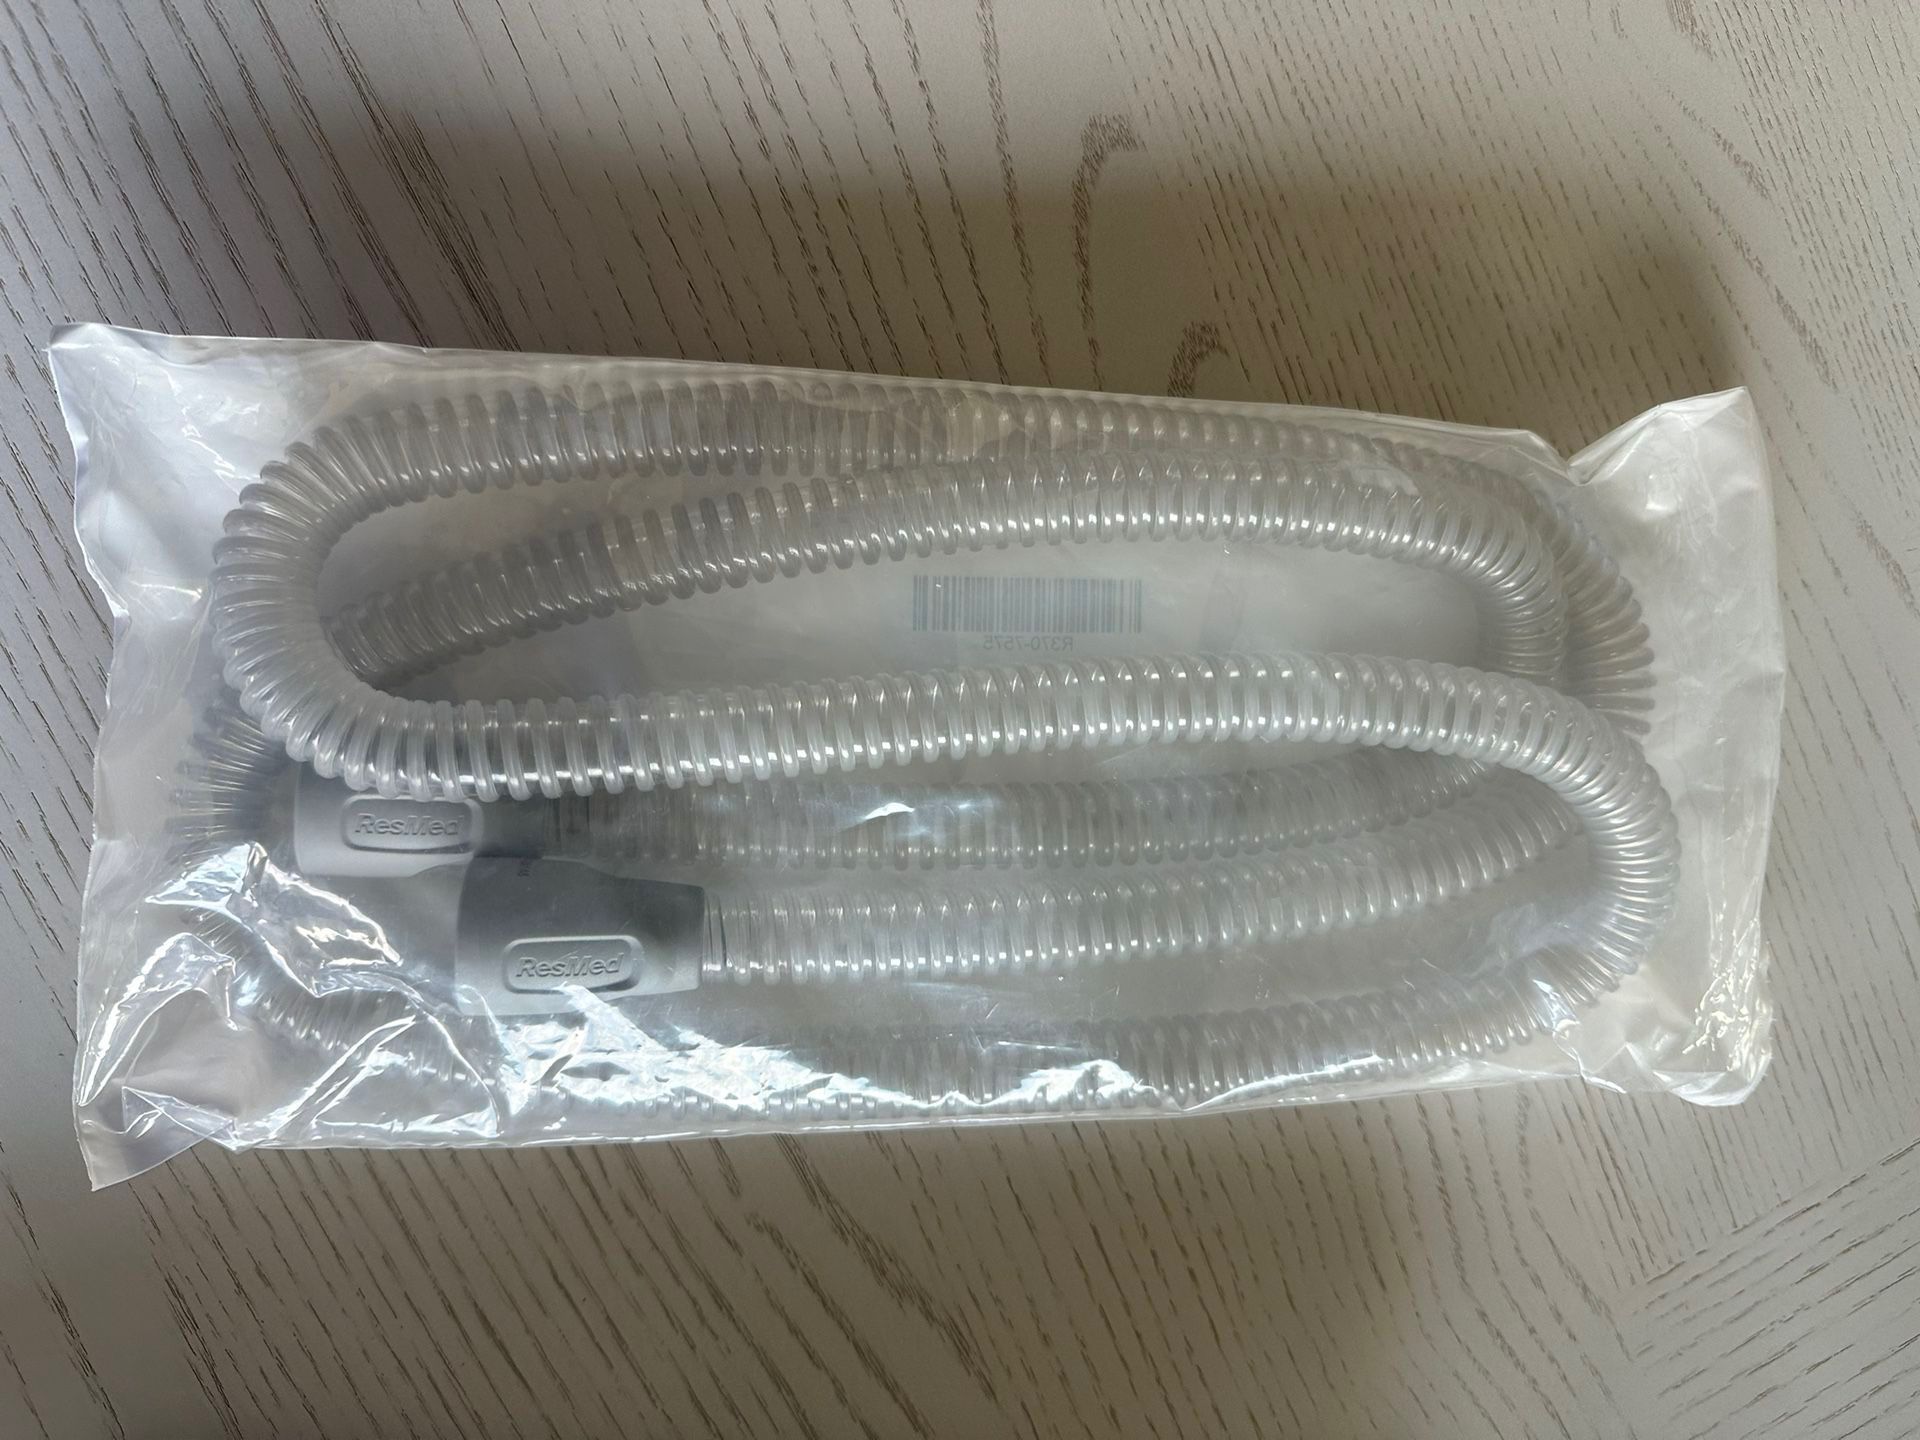 Tubing For CPAP Machine